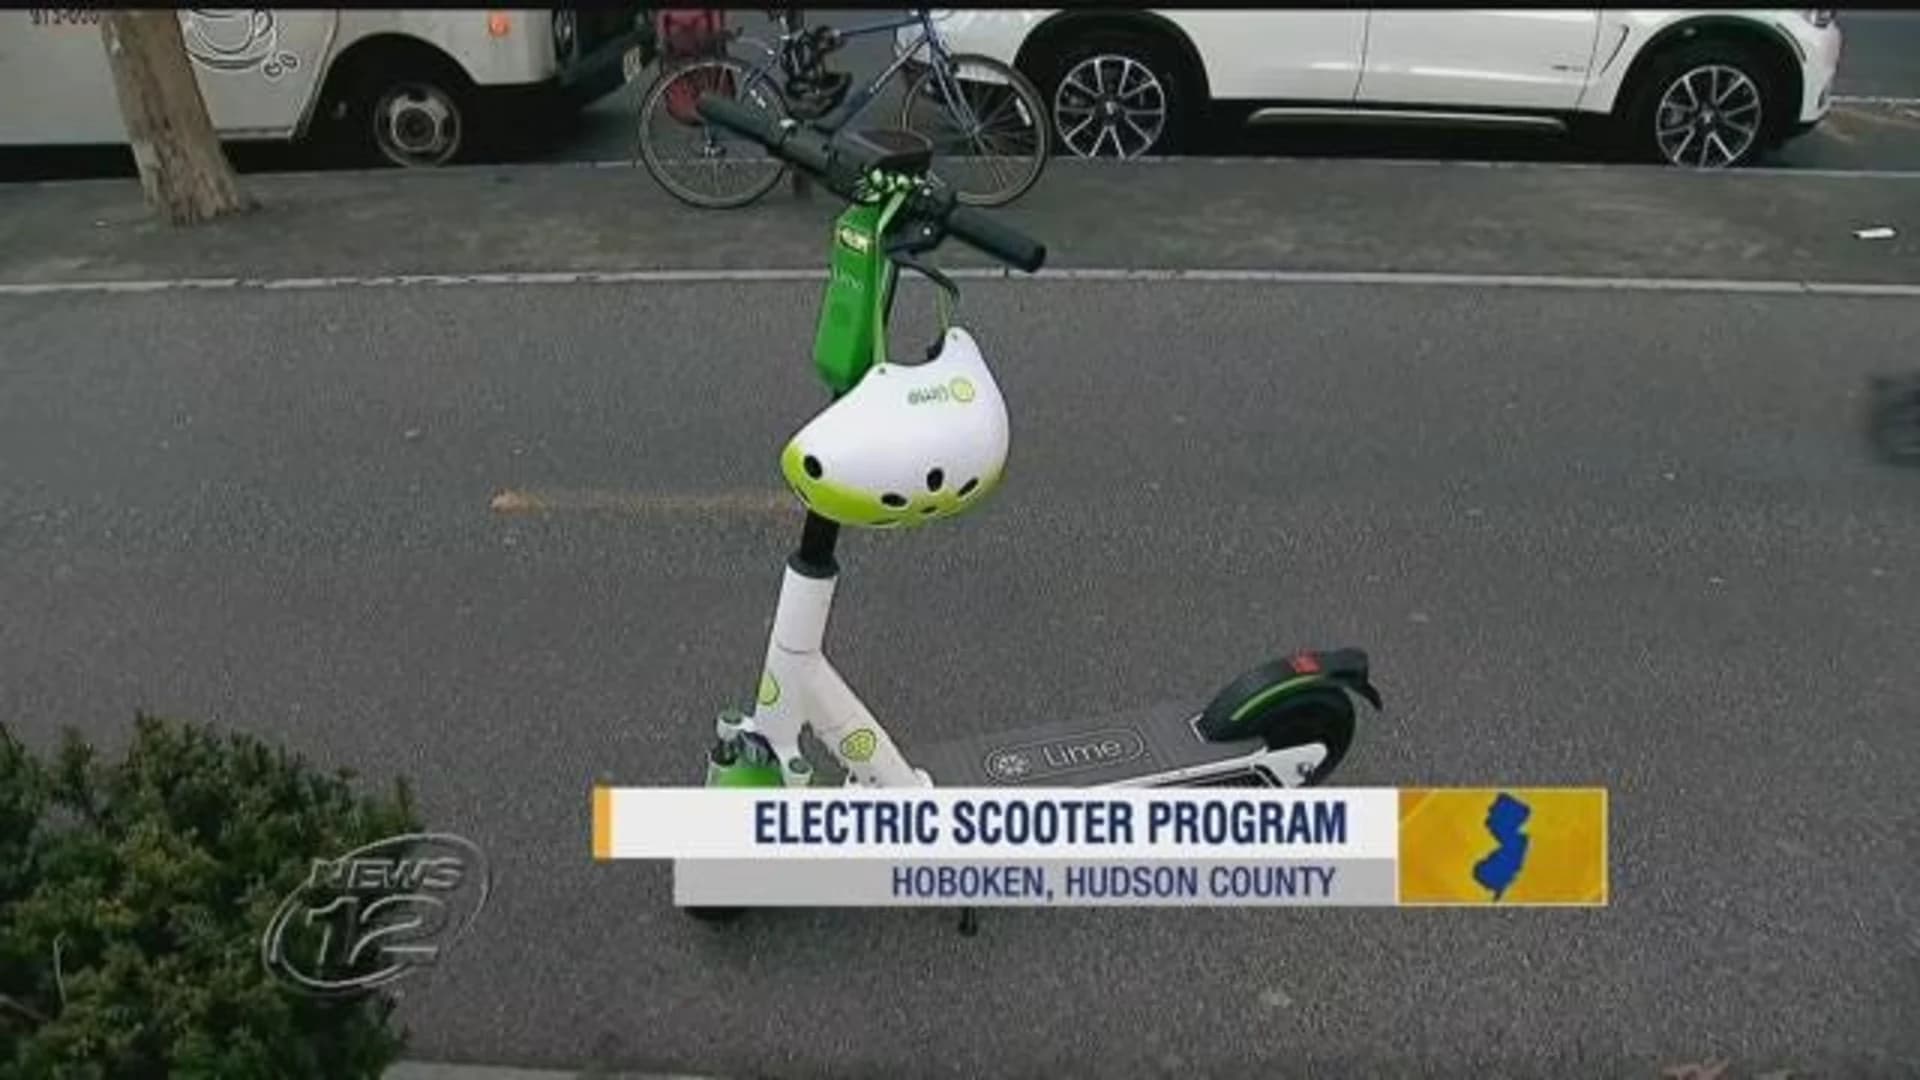 E-scooter revolution to hit the streets of Hoboken